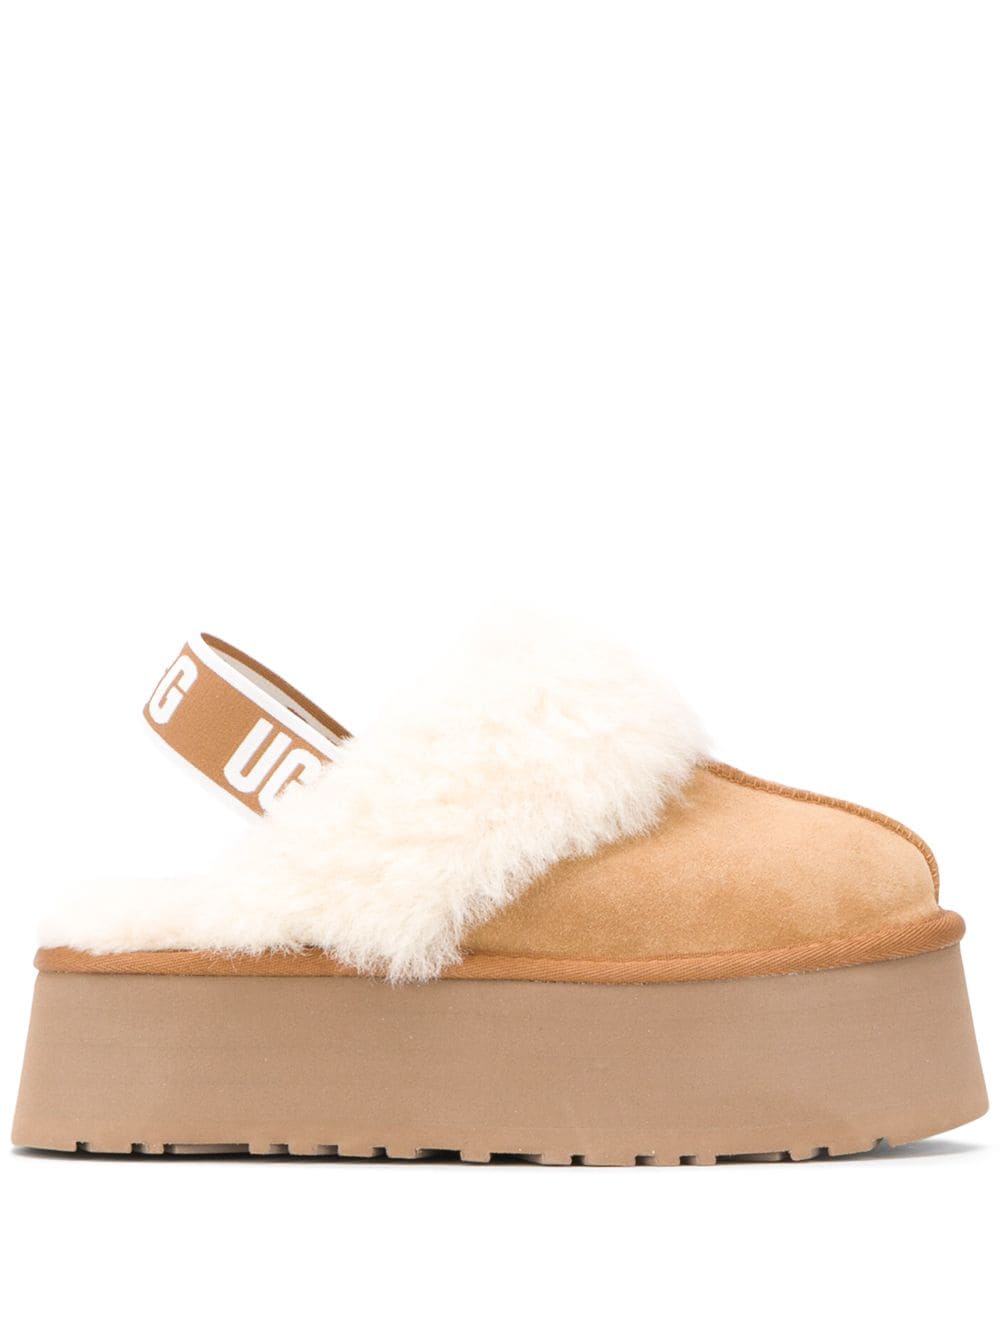 UGG
faux fur slingback sandals
Classic Ultra suede